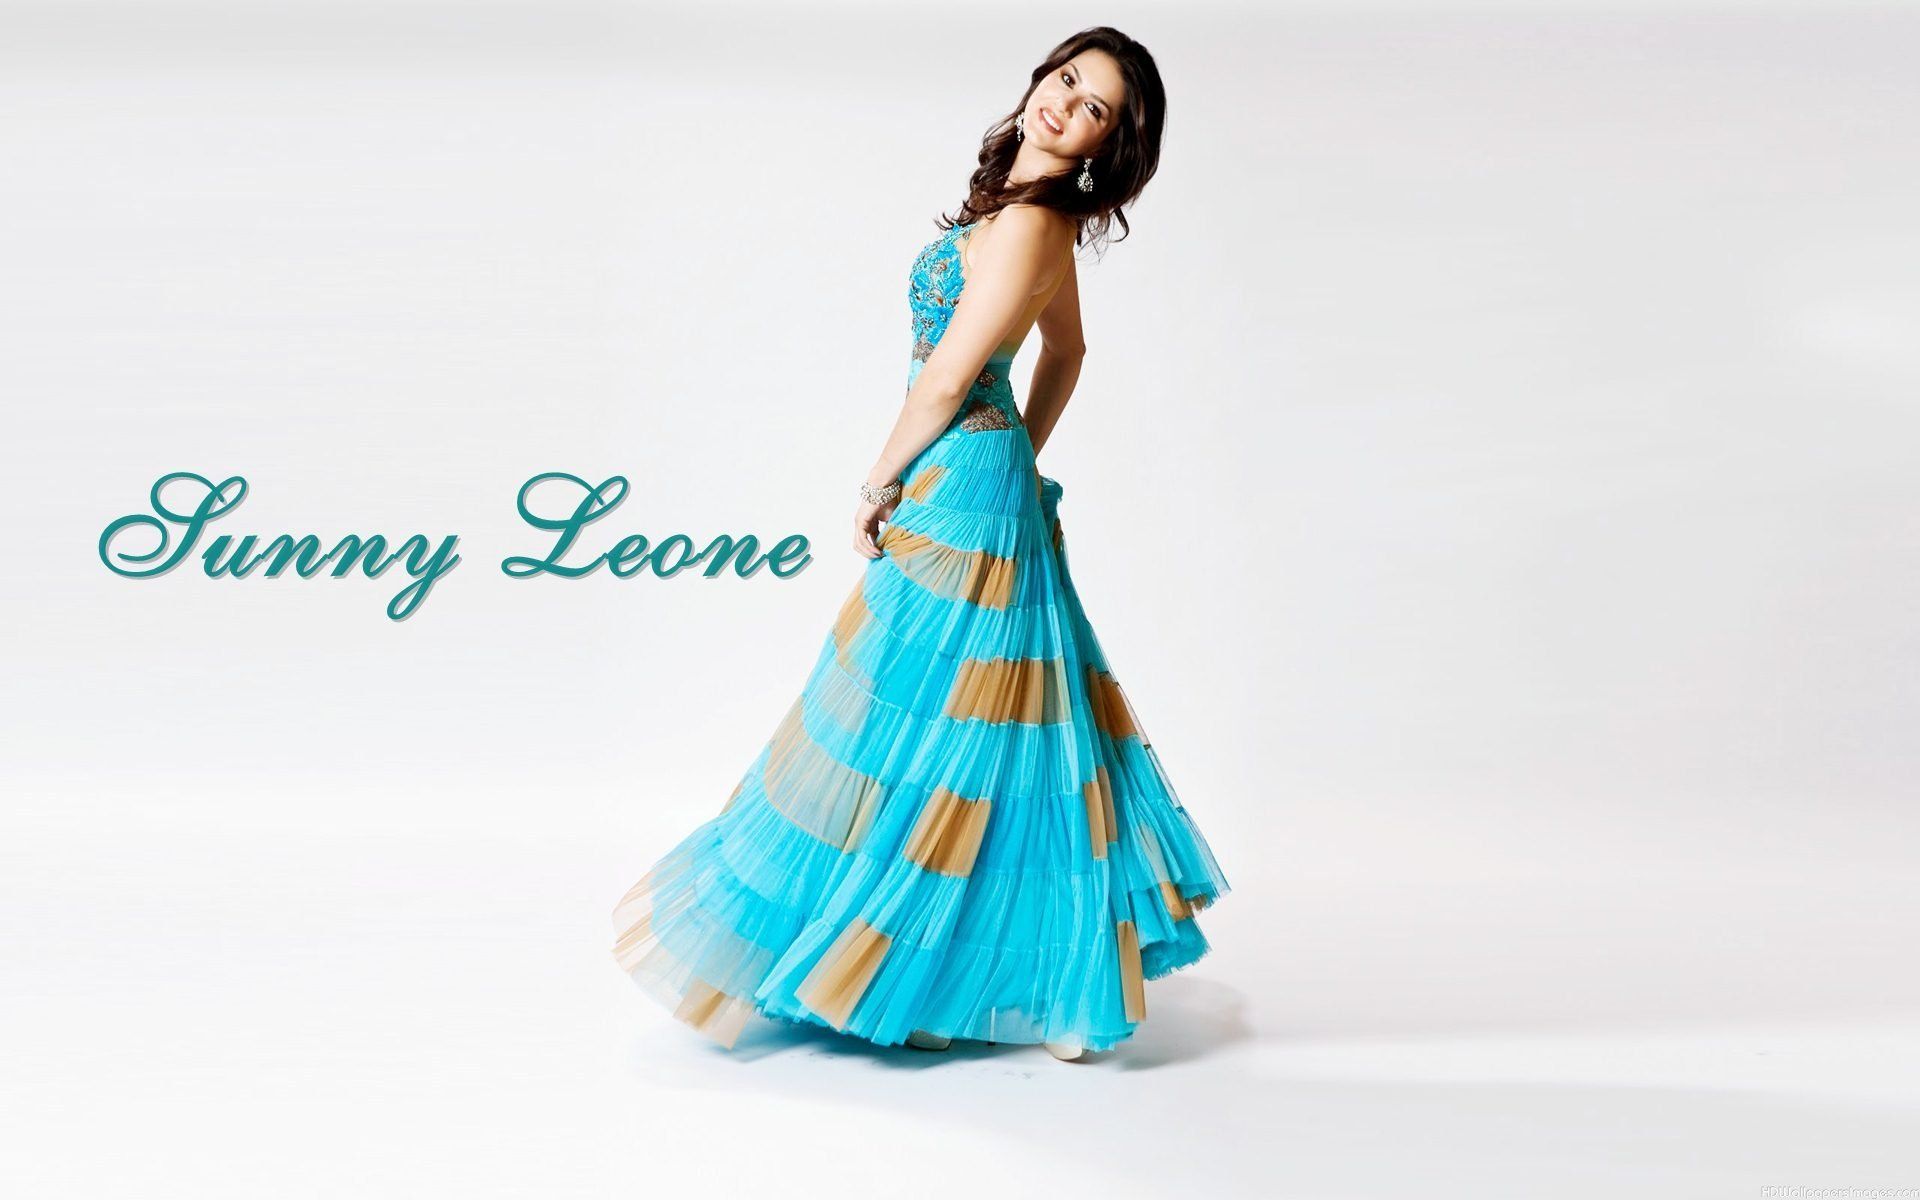 Sunny Leone HD Wallpapers - HD WallpapersHD Backgrounds